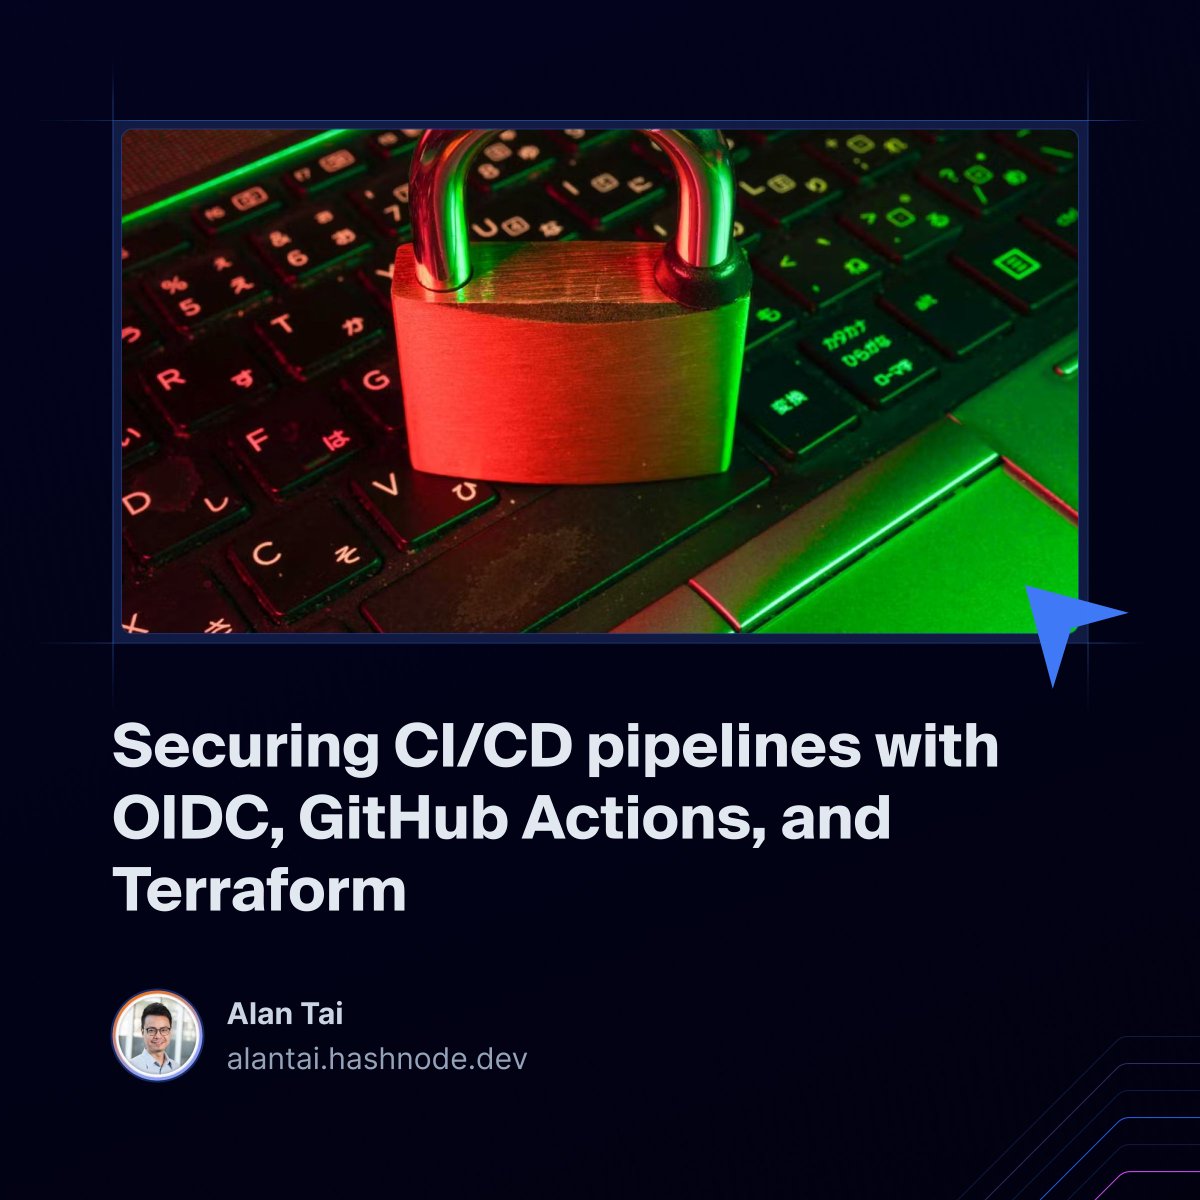 OIDC provides a powerful approach to securing CI/CD pipelines in highly regulated industries like banking.

No need to worry about securing CI/CD pipelines with OIDC. This article explores how to implement OIDC in a GitHub workflow using Terraform to provision AWS resources.